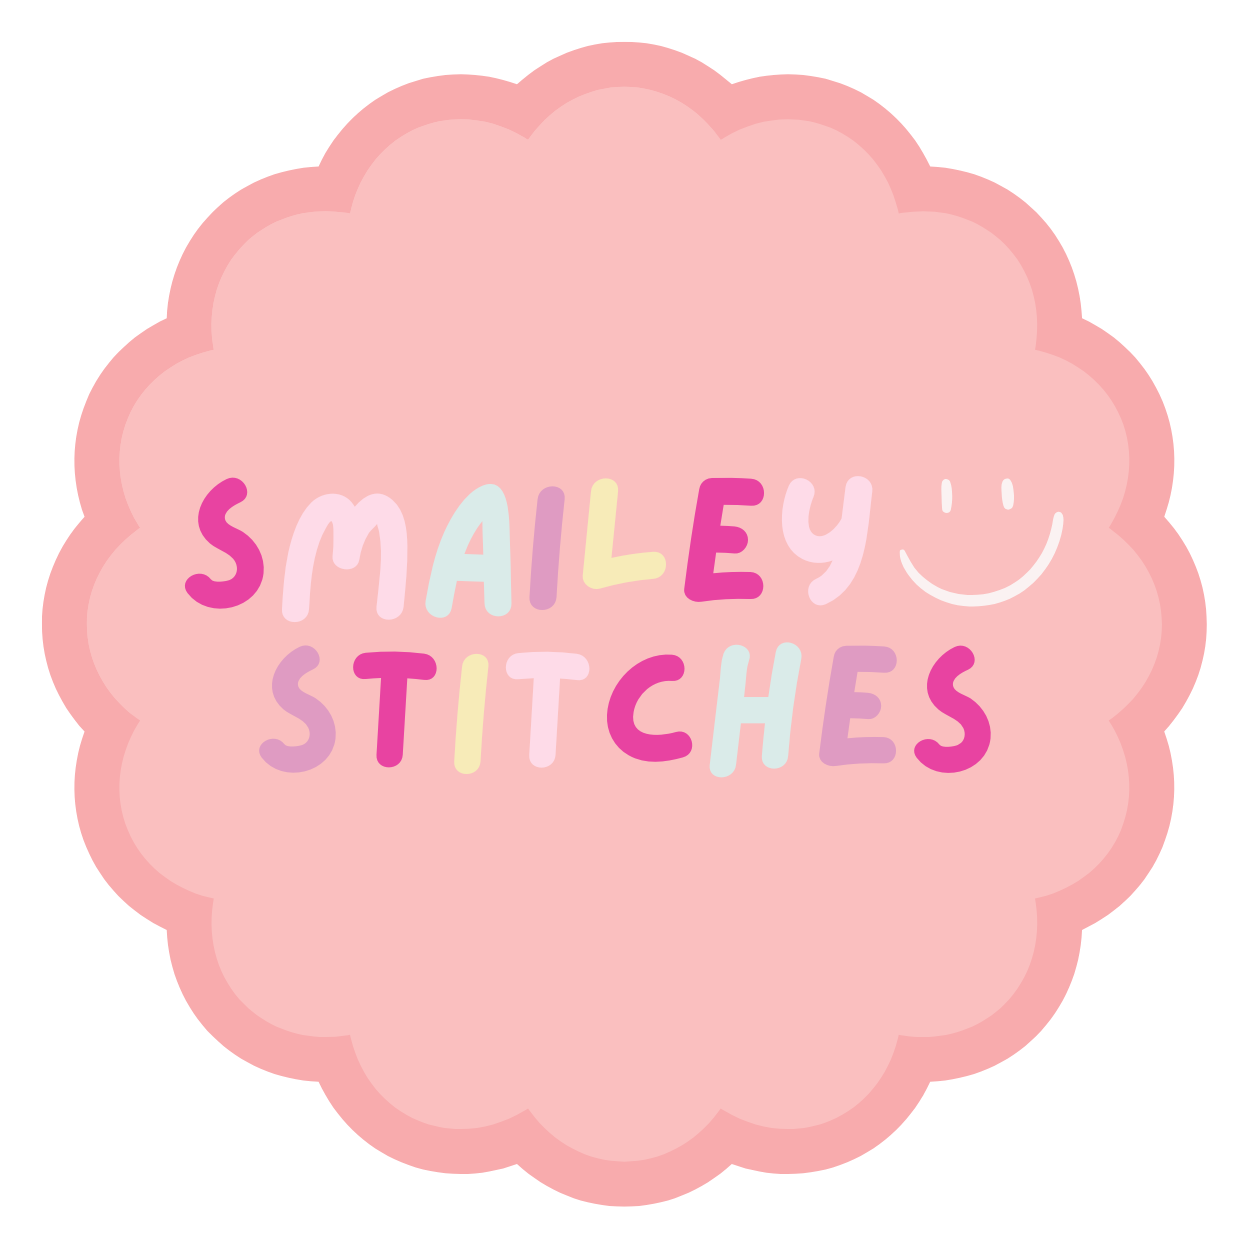 Smailey Stitches